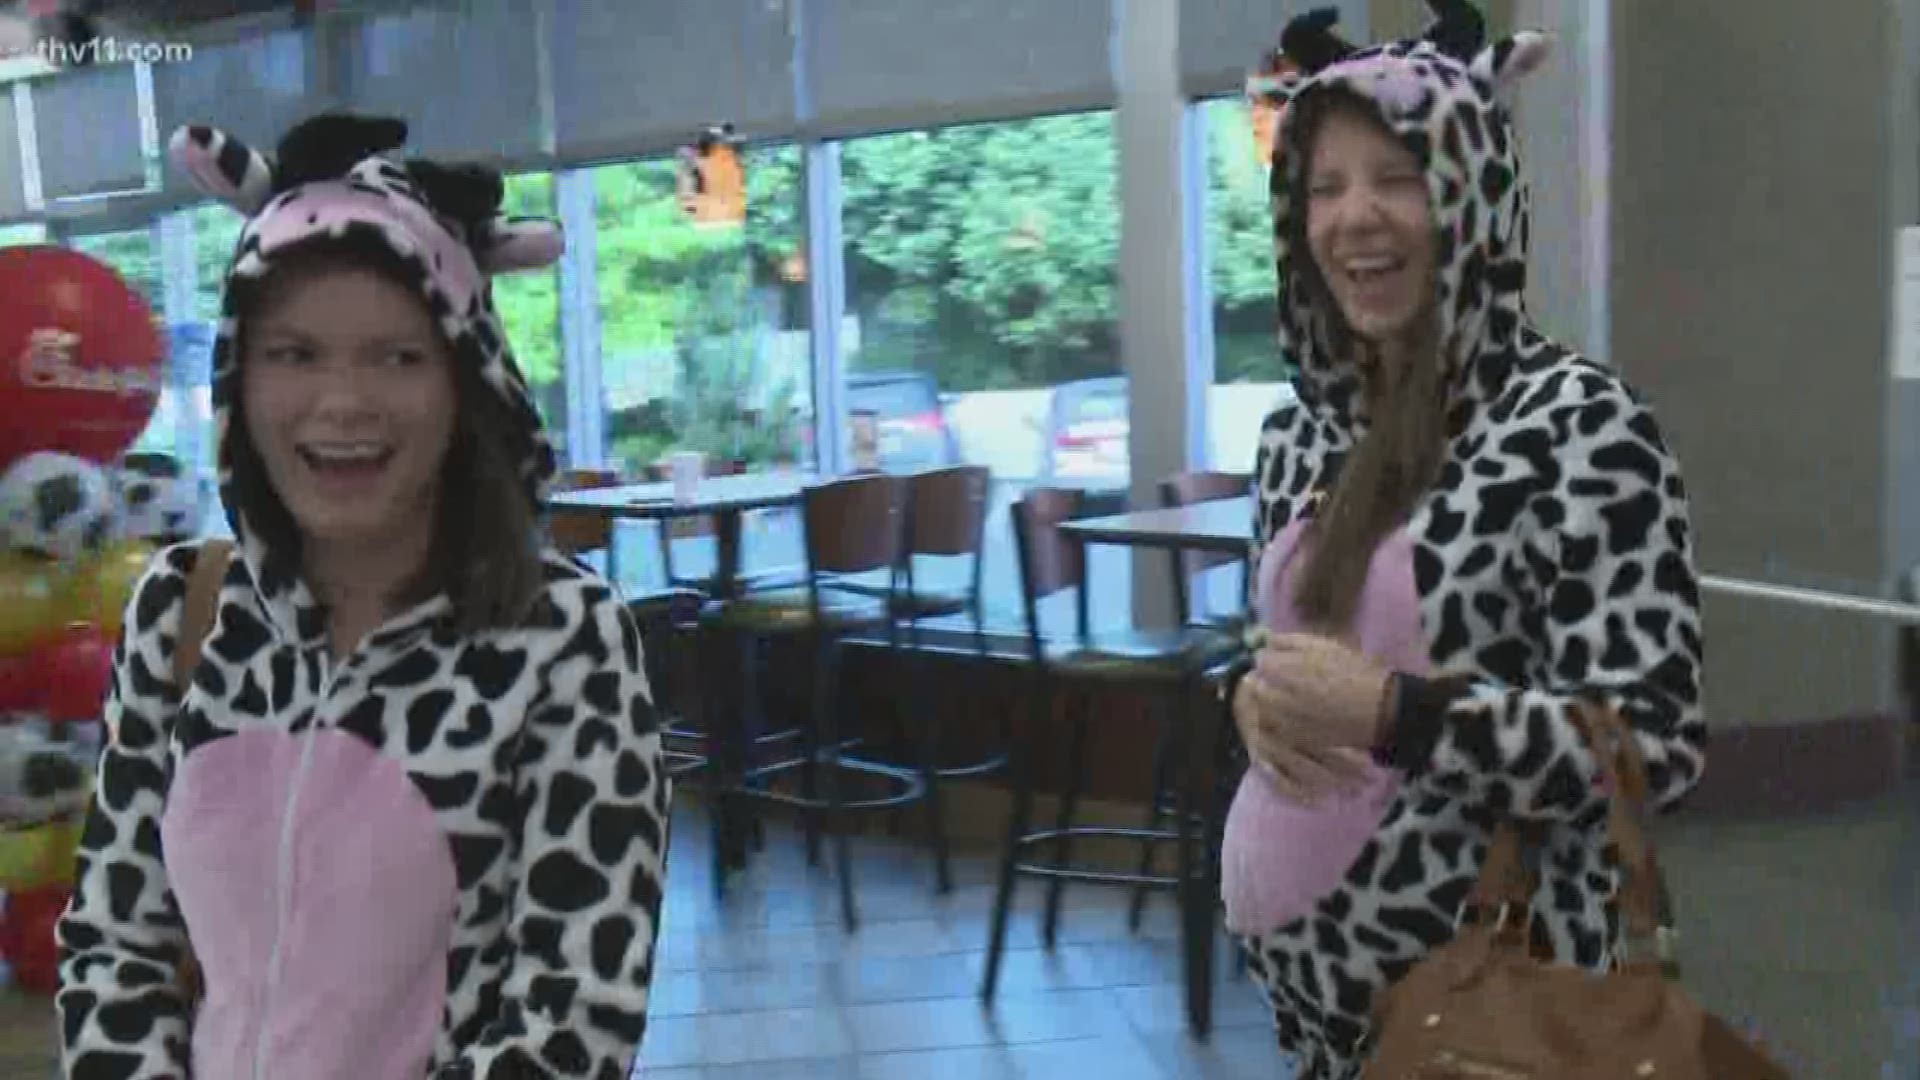 Two Chick-Fil-A fans dressed as cows to get some free food from Chick-Fil-A on Cow Appreciation Day. But you only need to wear some cow-themed apparel to get in on the deal.